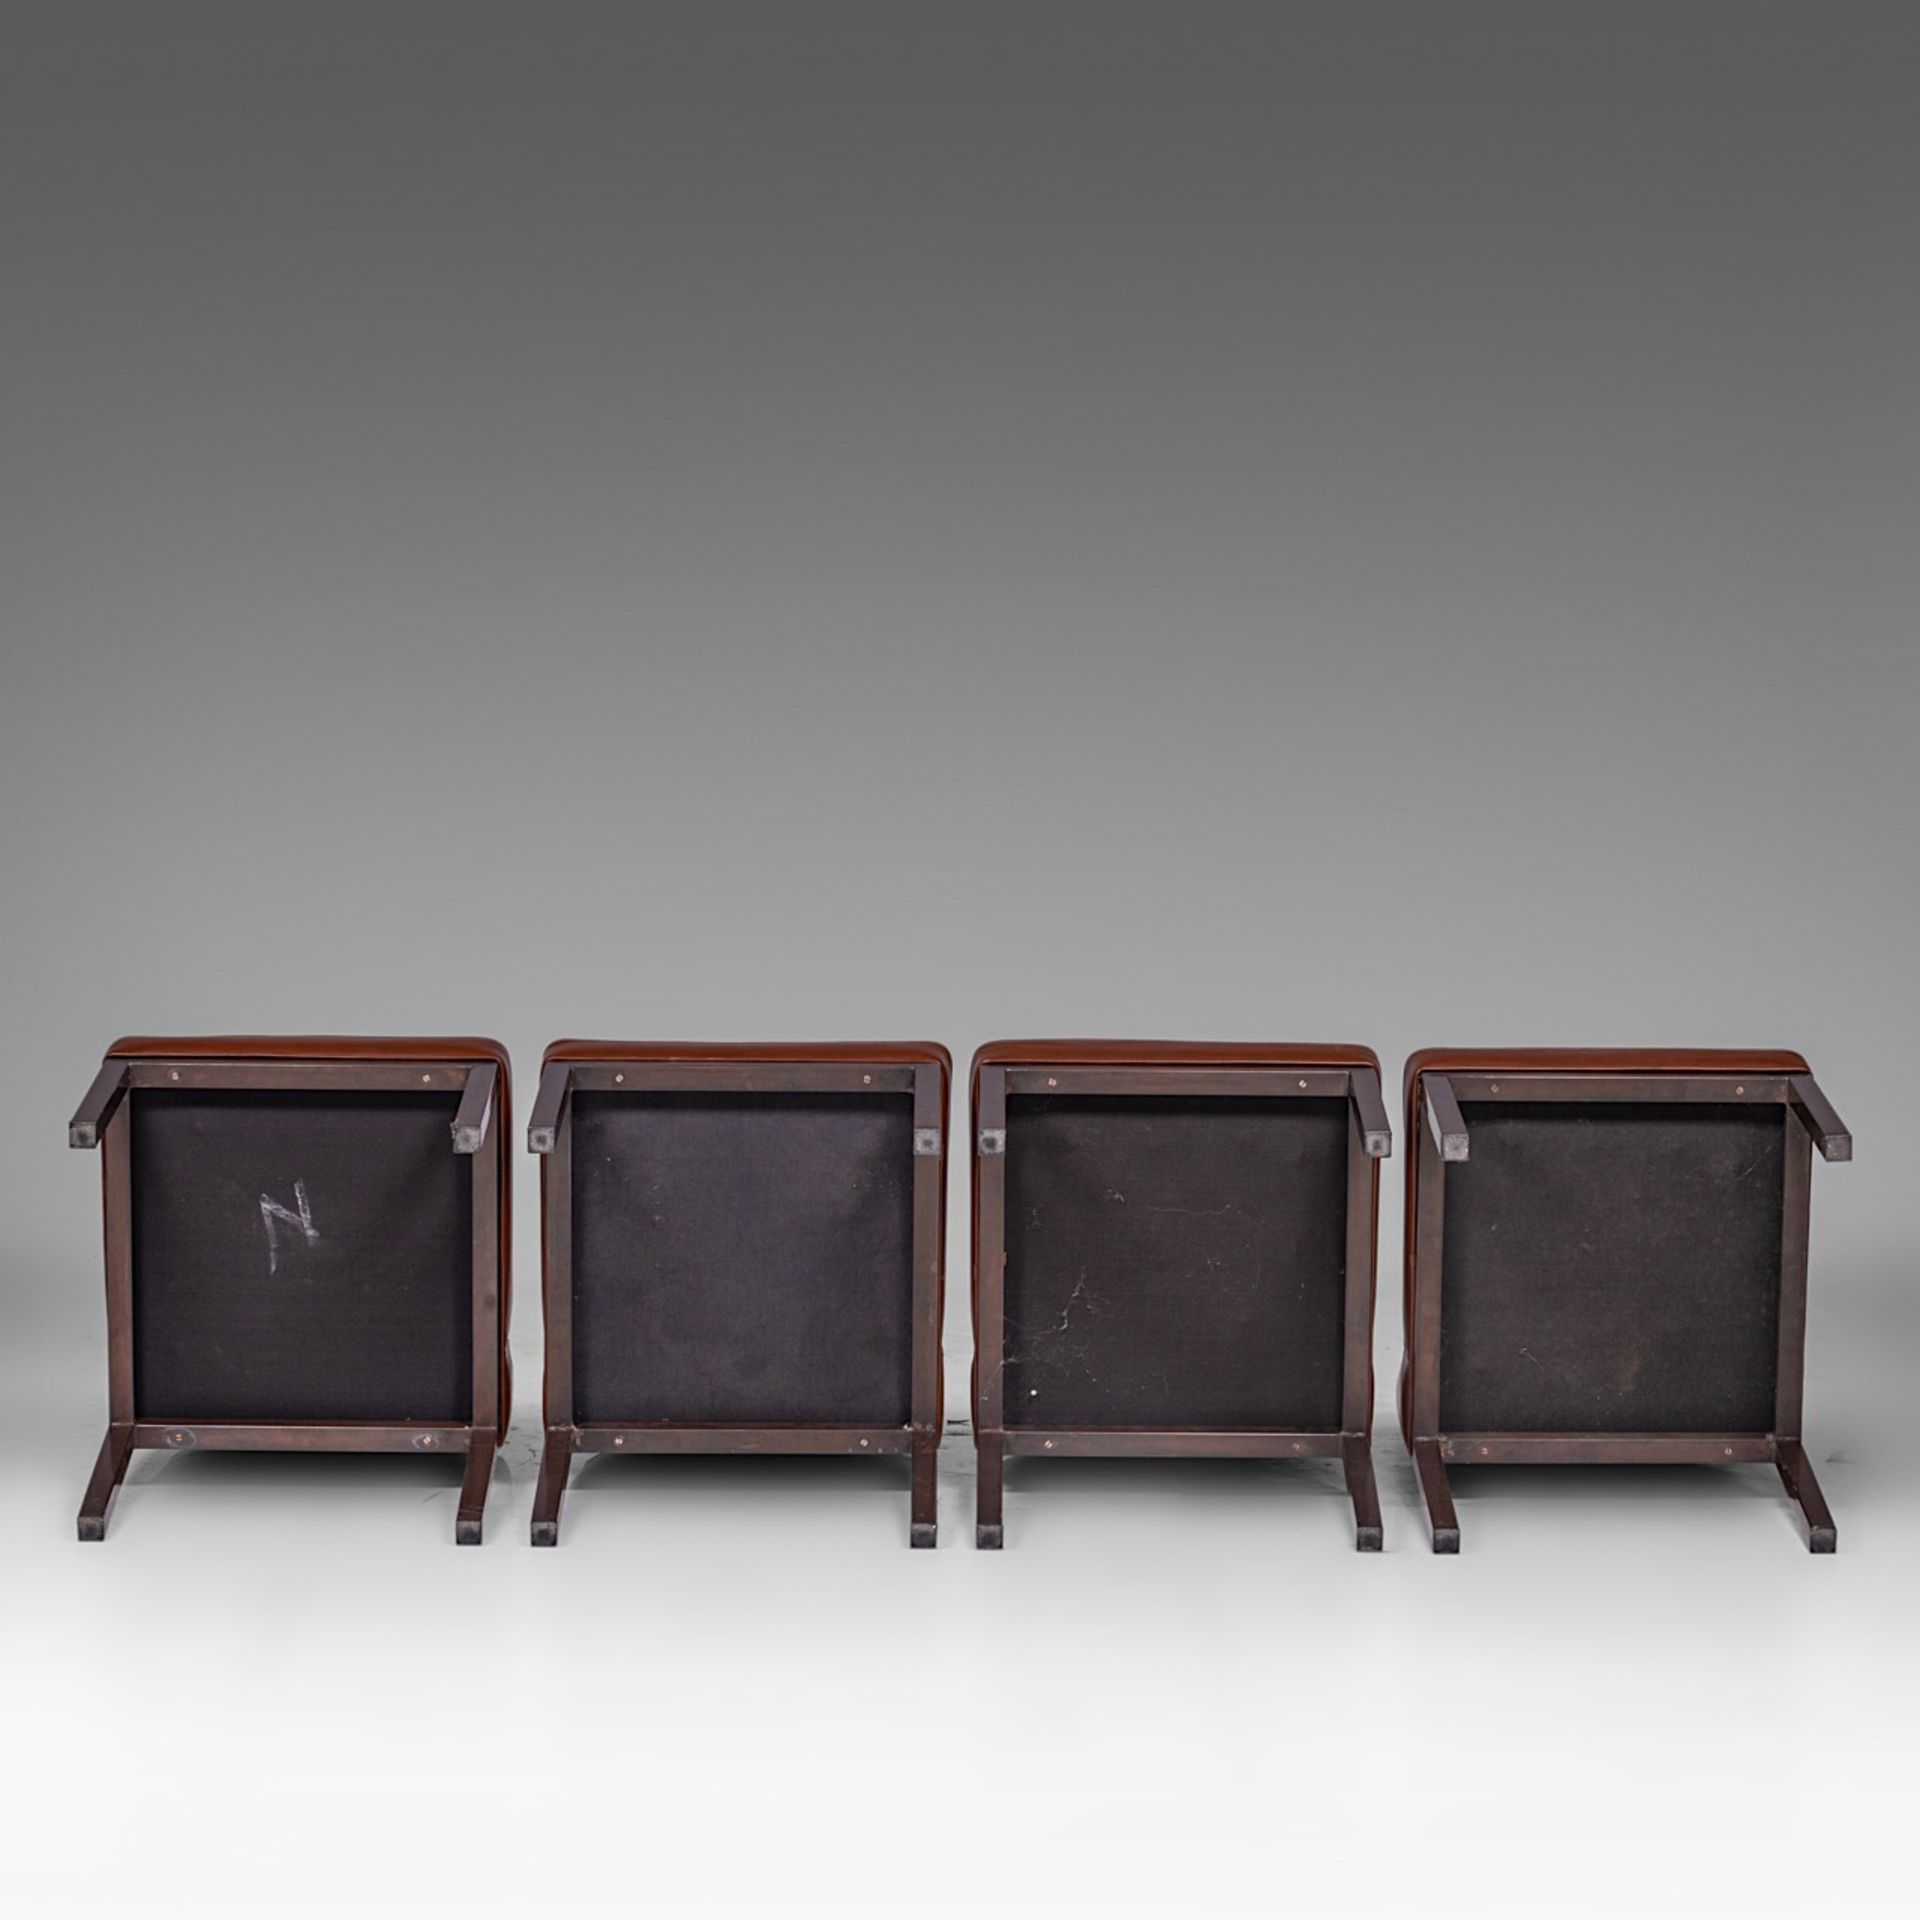 A set of four Jules Wabbes (1919-1974) chairs in brown leather and lacquered metal, H 79 cm - Image 9 of 9